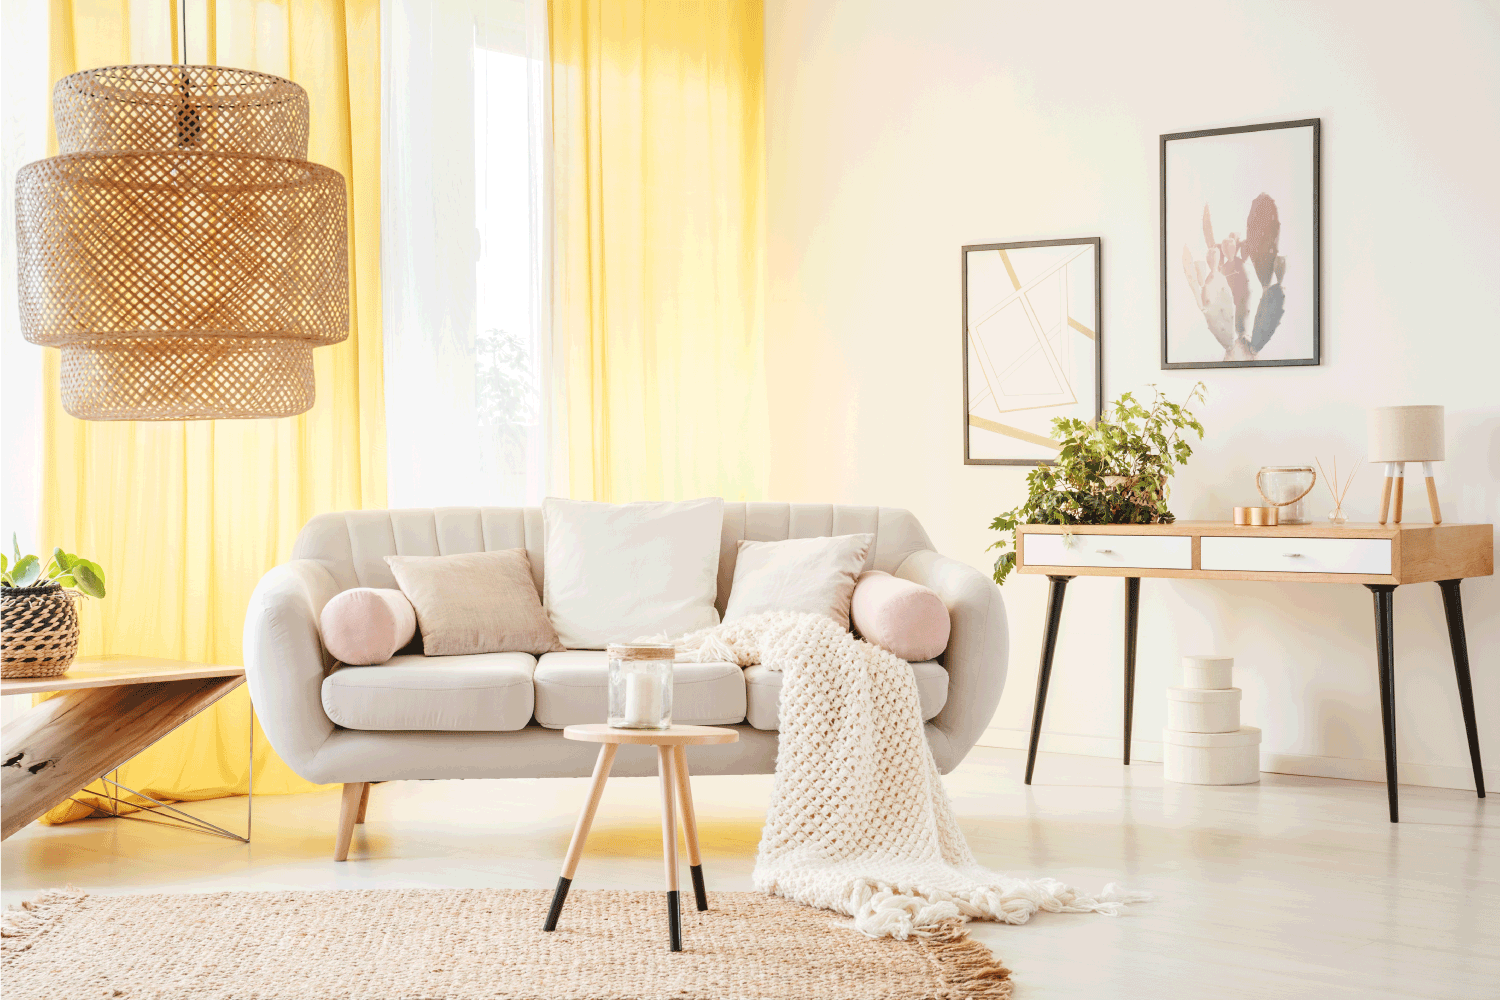 Rattan lamp and wooden stool on carpet in warm bohemian living room with yellow curtains and beige settee with white pillows